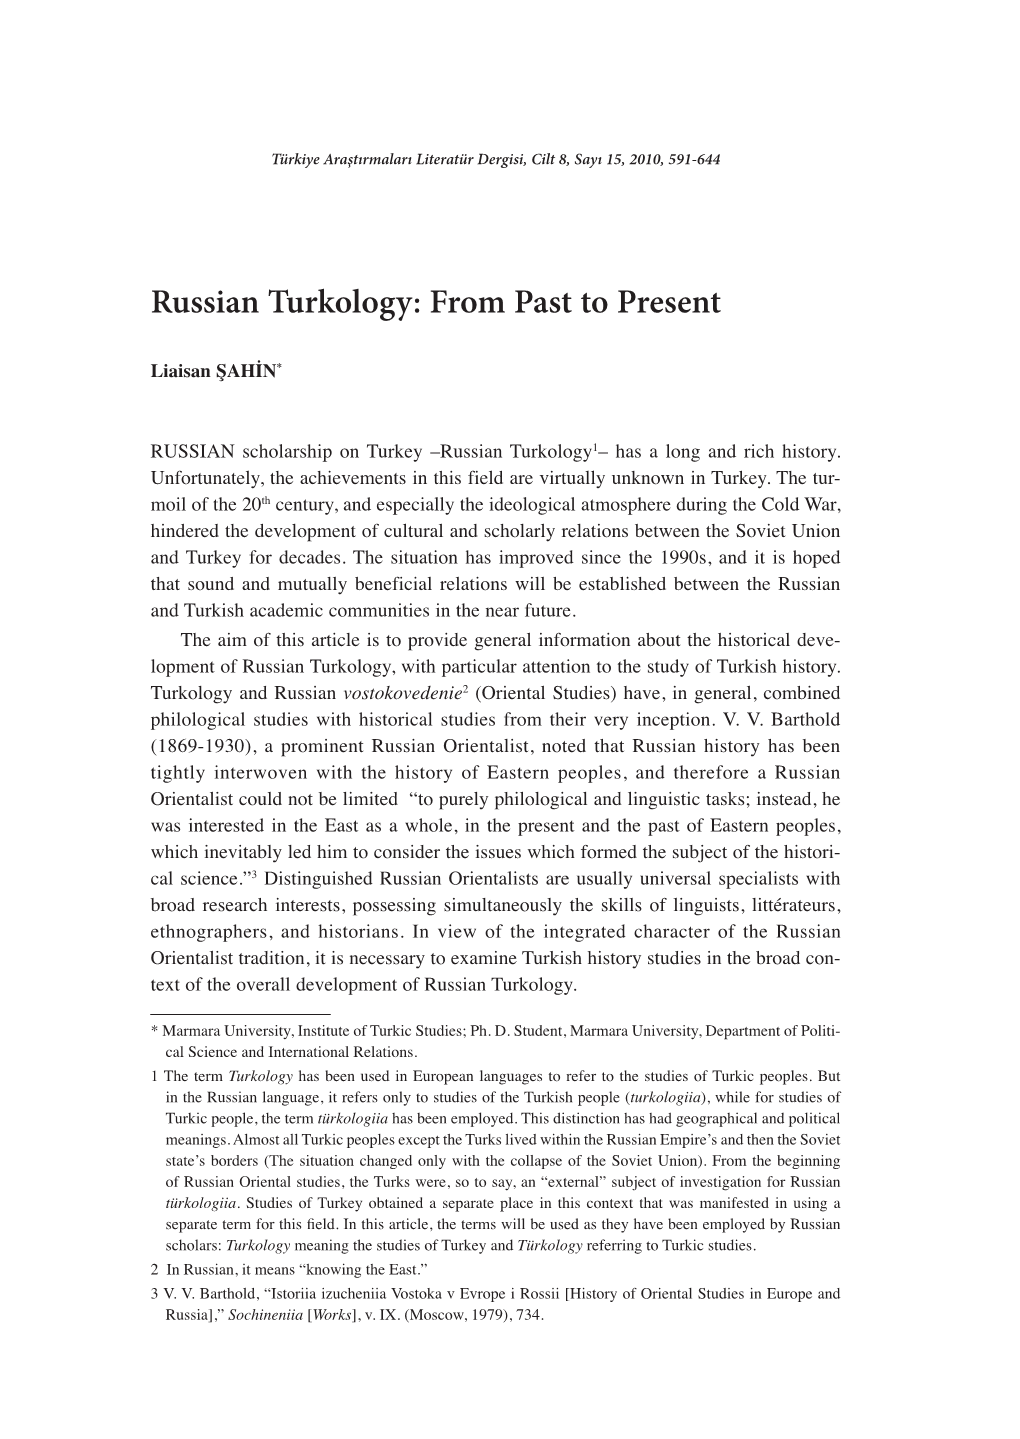 Russian Turkology: from Past to Present